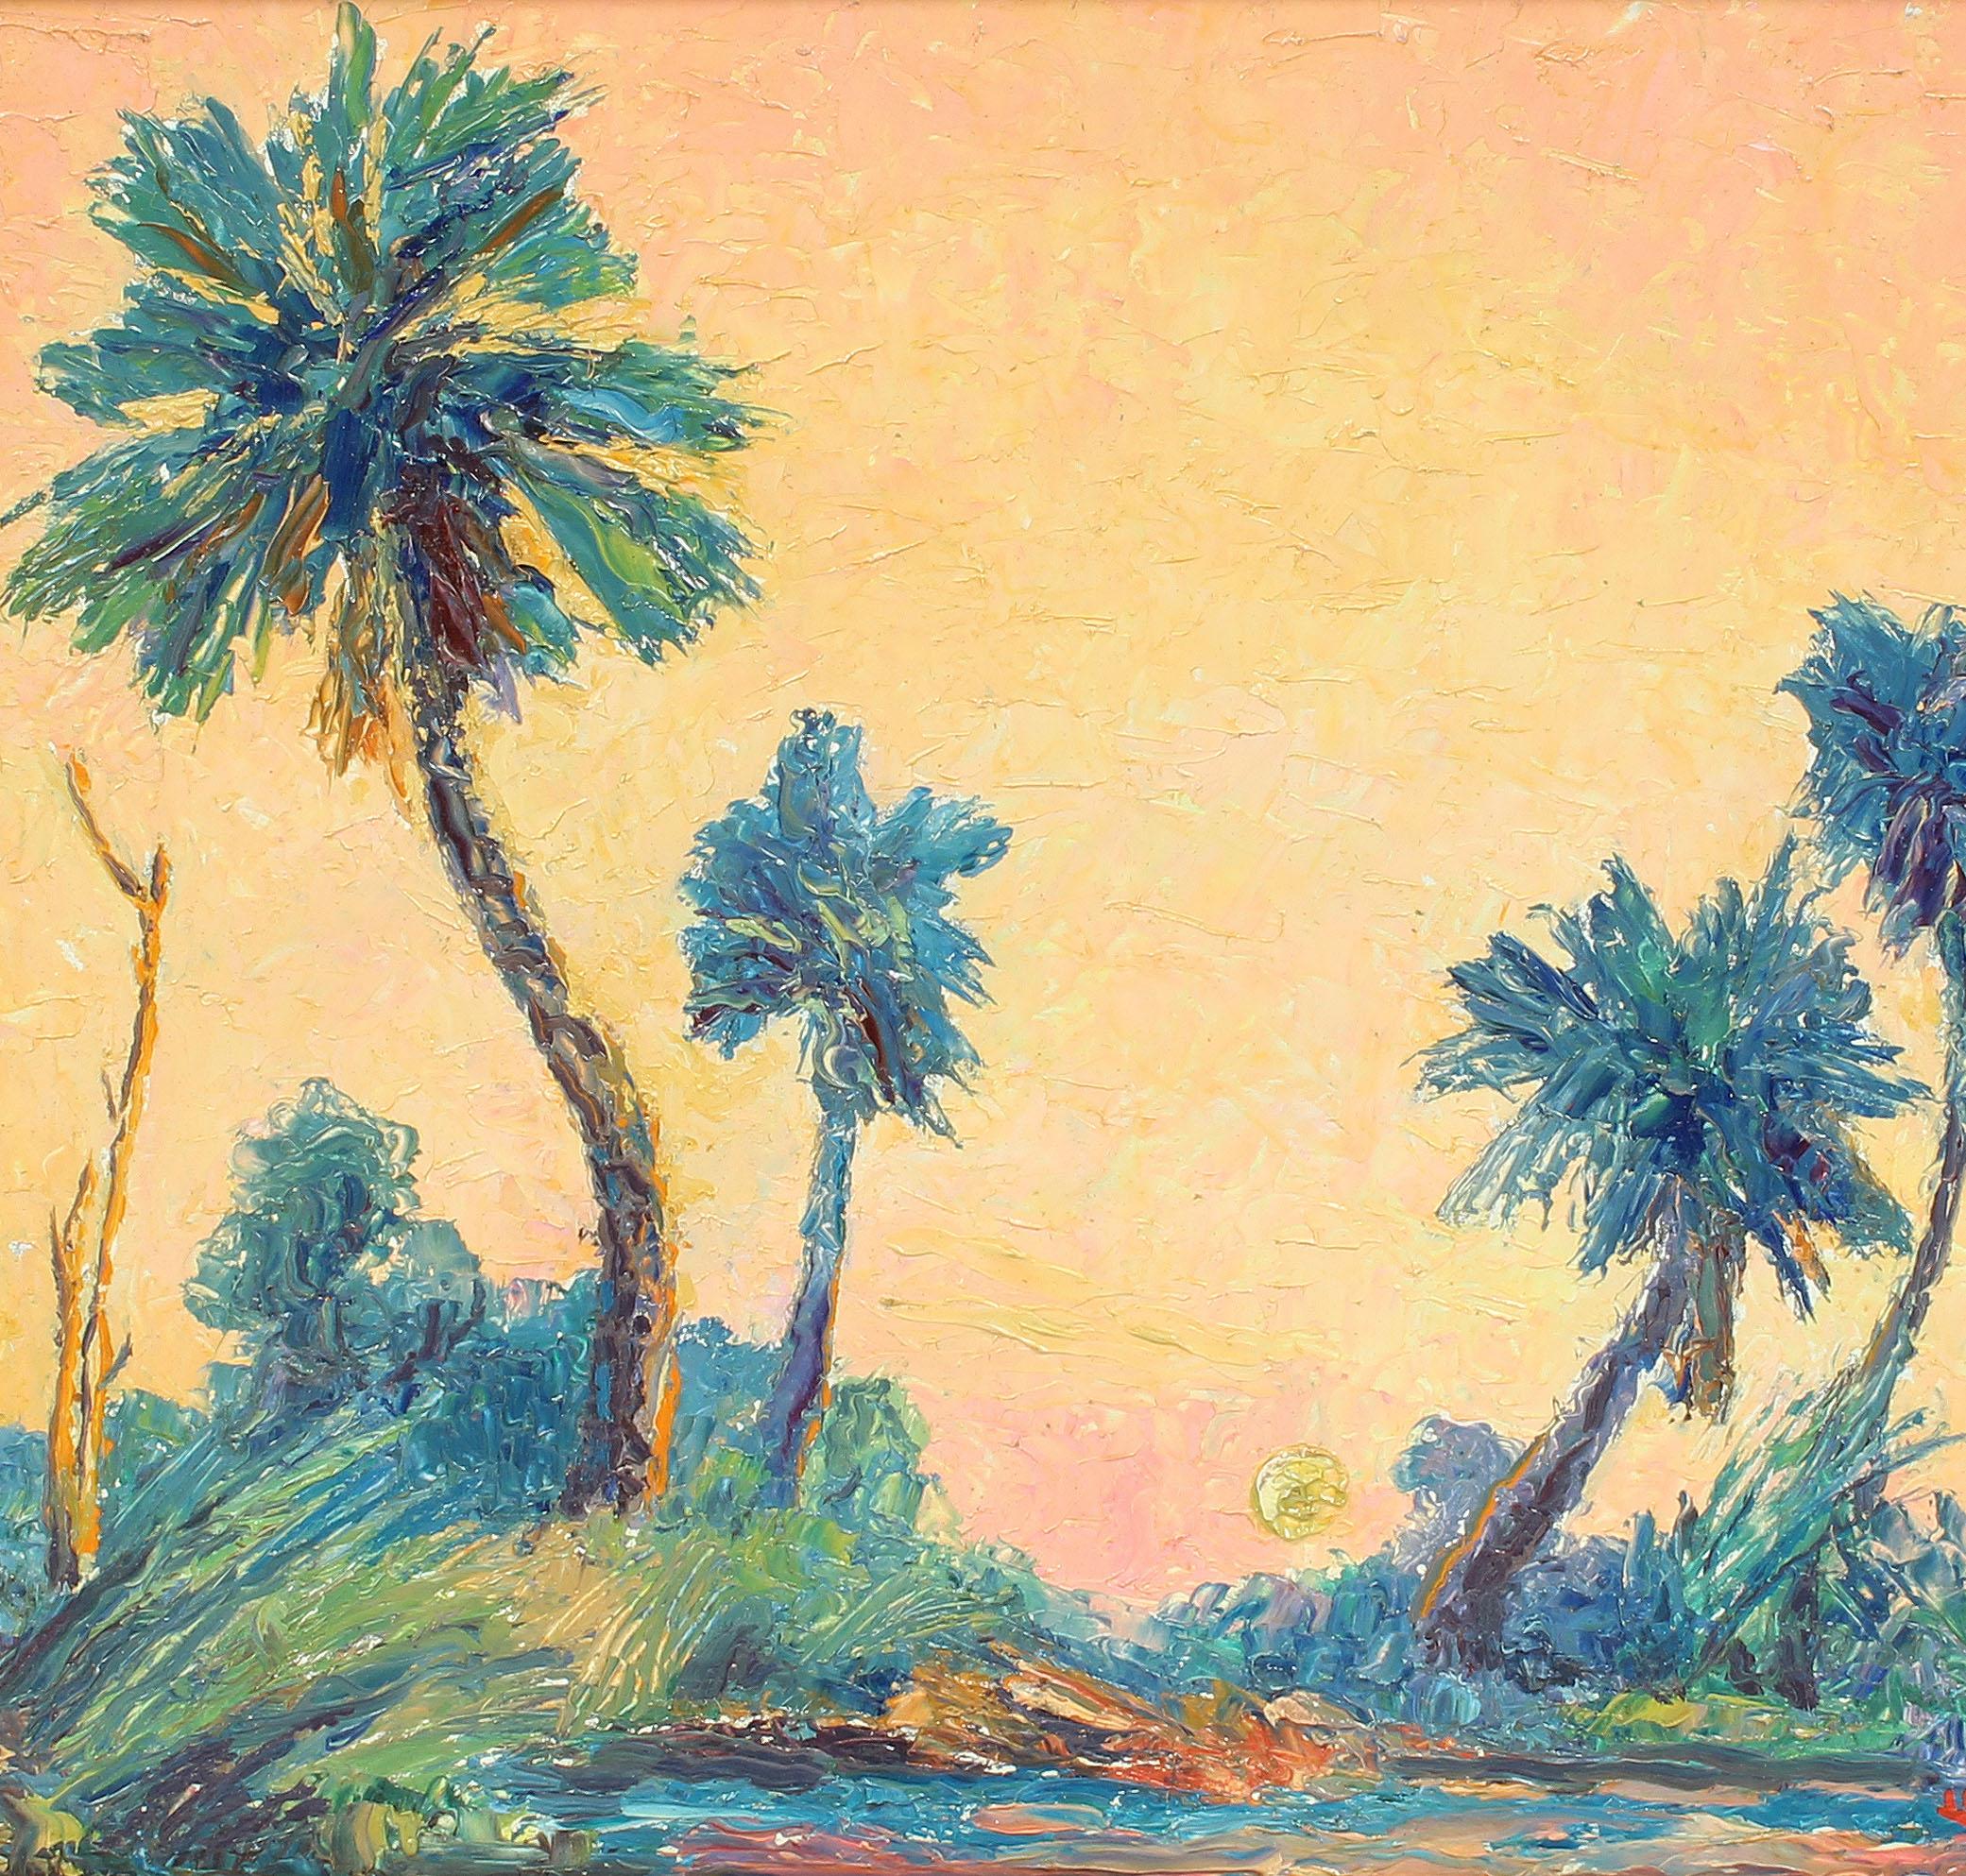 Antique American Impressionist Tropical Florida Beach Scene Signed Oil Painting - Brown Landscape Painting by Francis Orville Libby